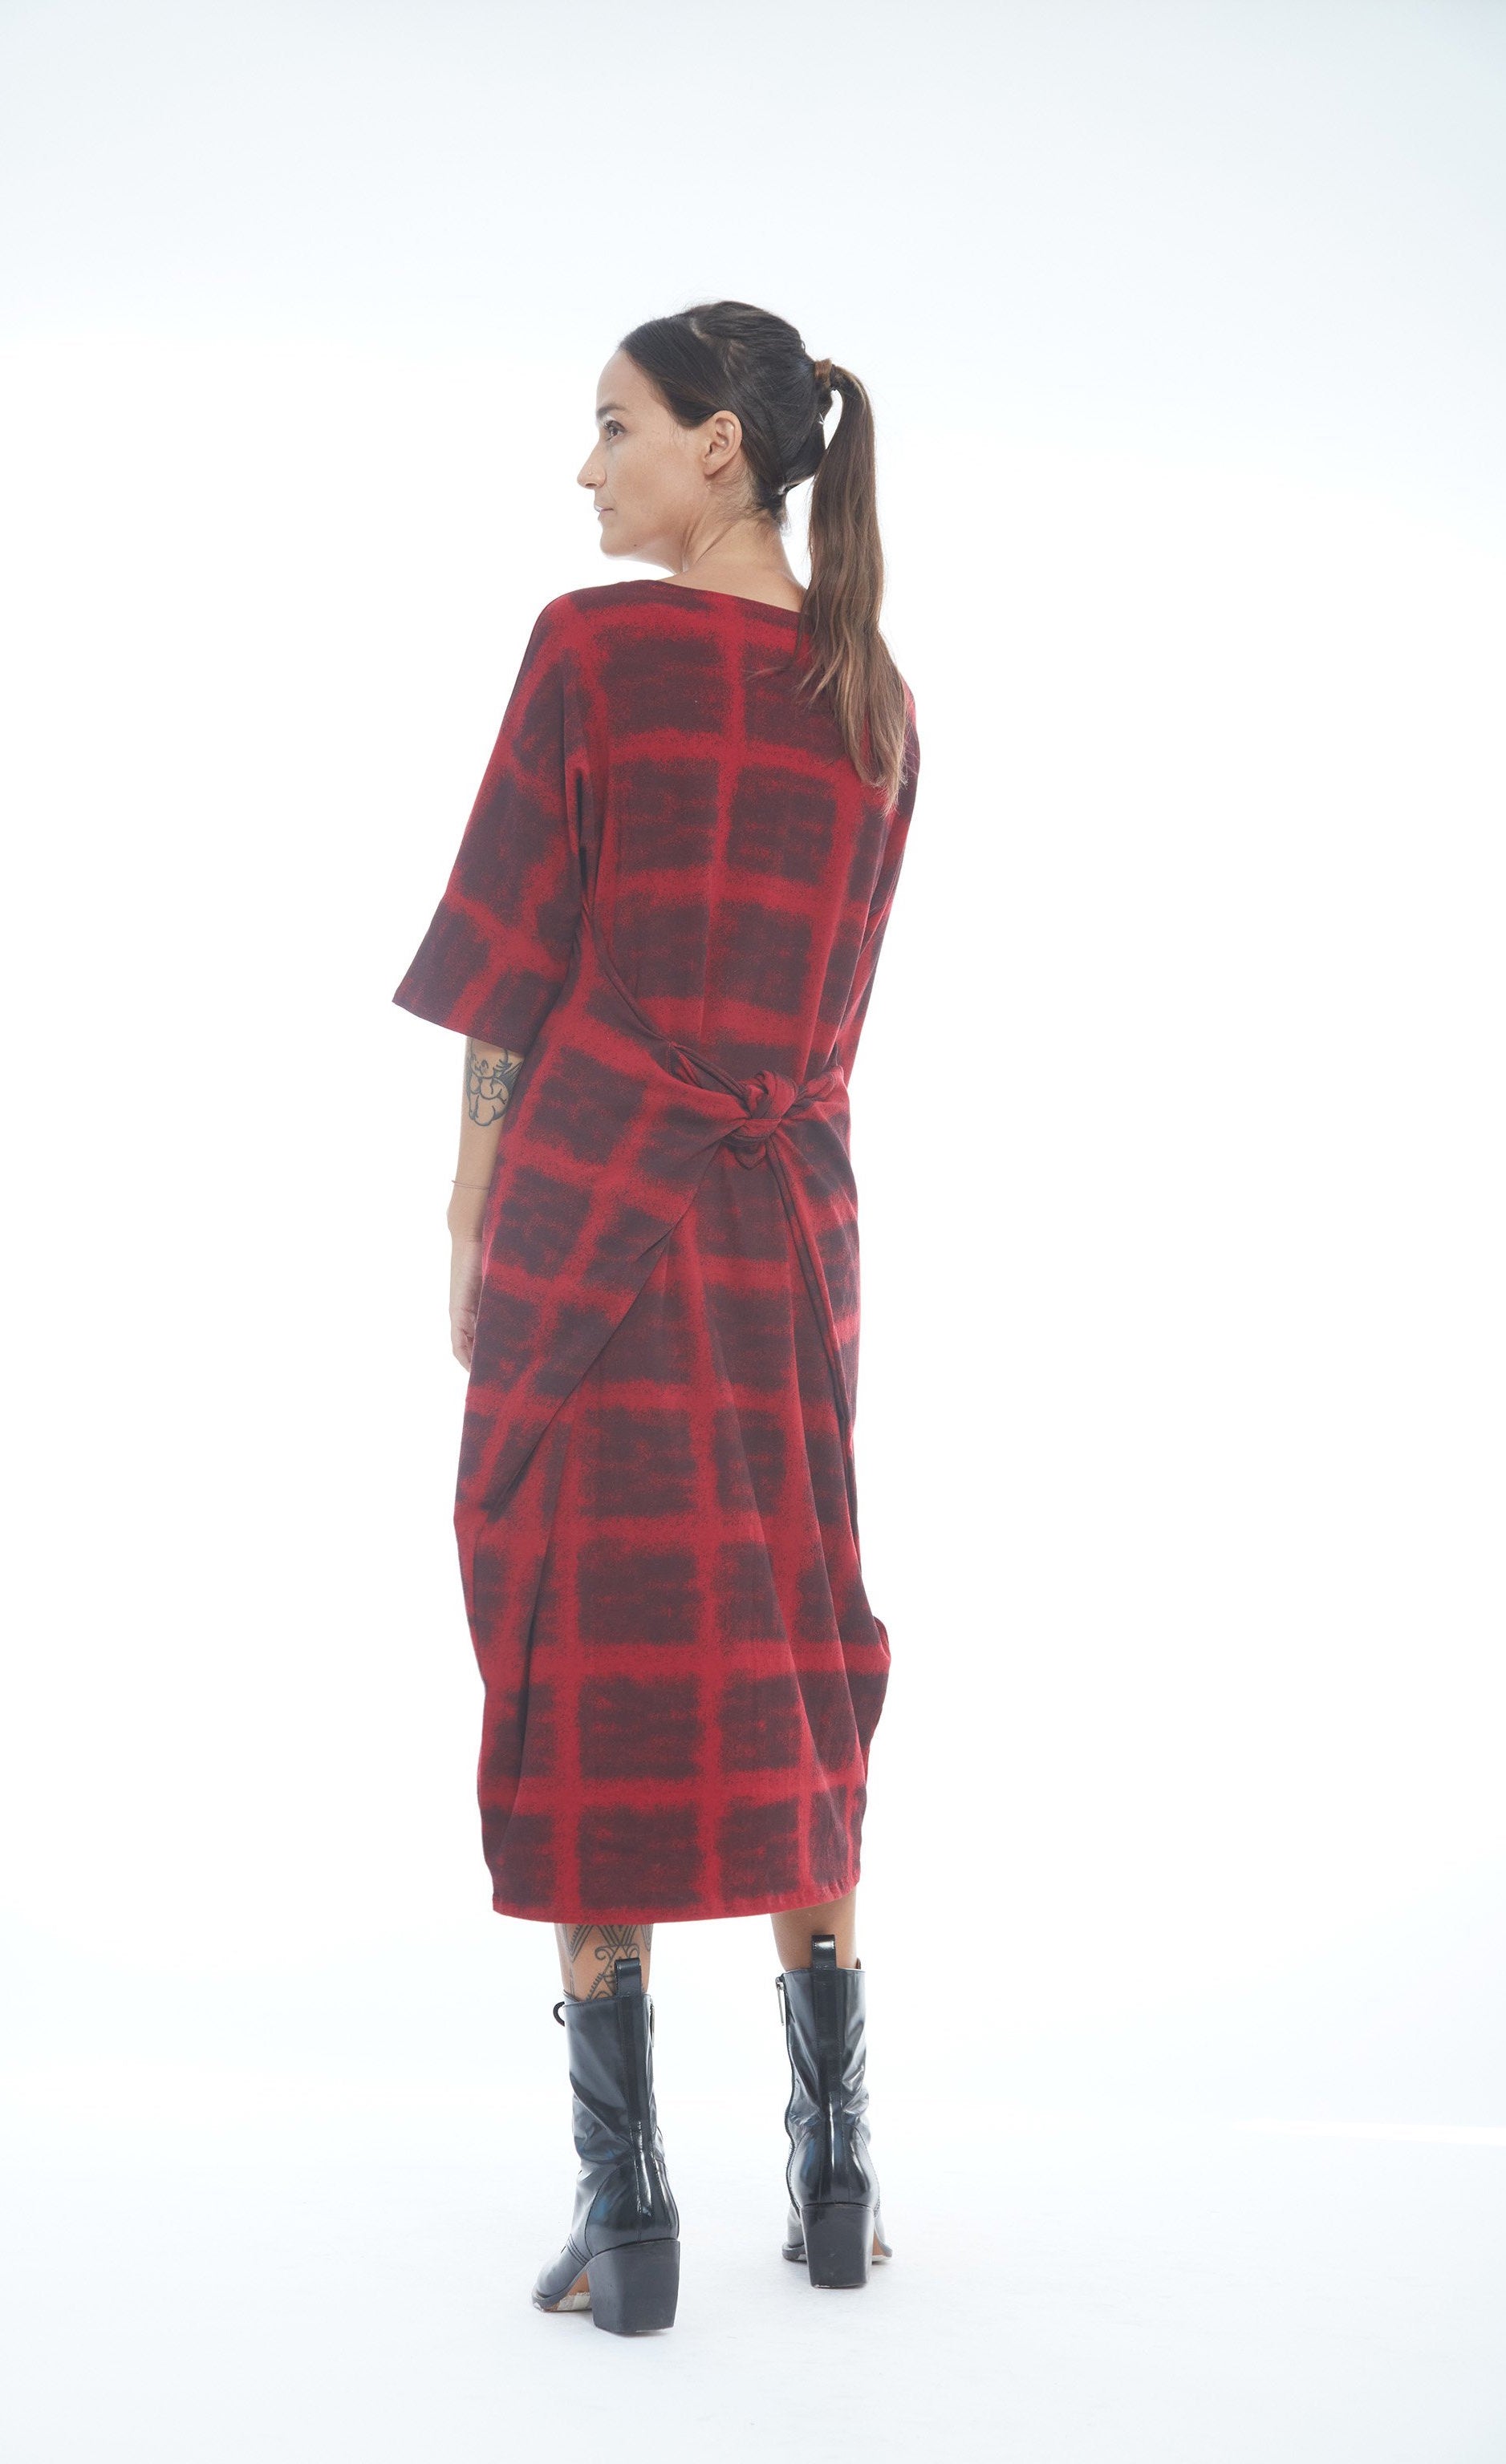 Back full body view of a woman wearing the mxmatthildur mavis dress in a red and black plaid print. This dress has 3/4 length sleeves, and large pockets that are pulled to the back and tied together.